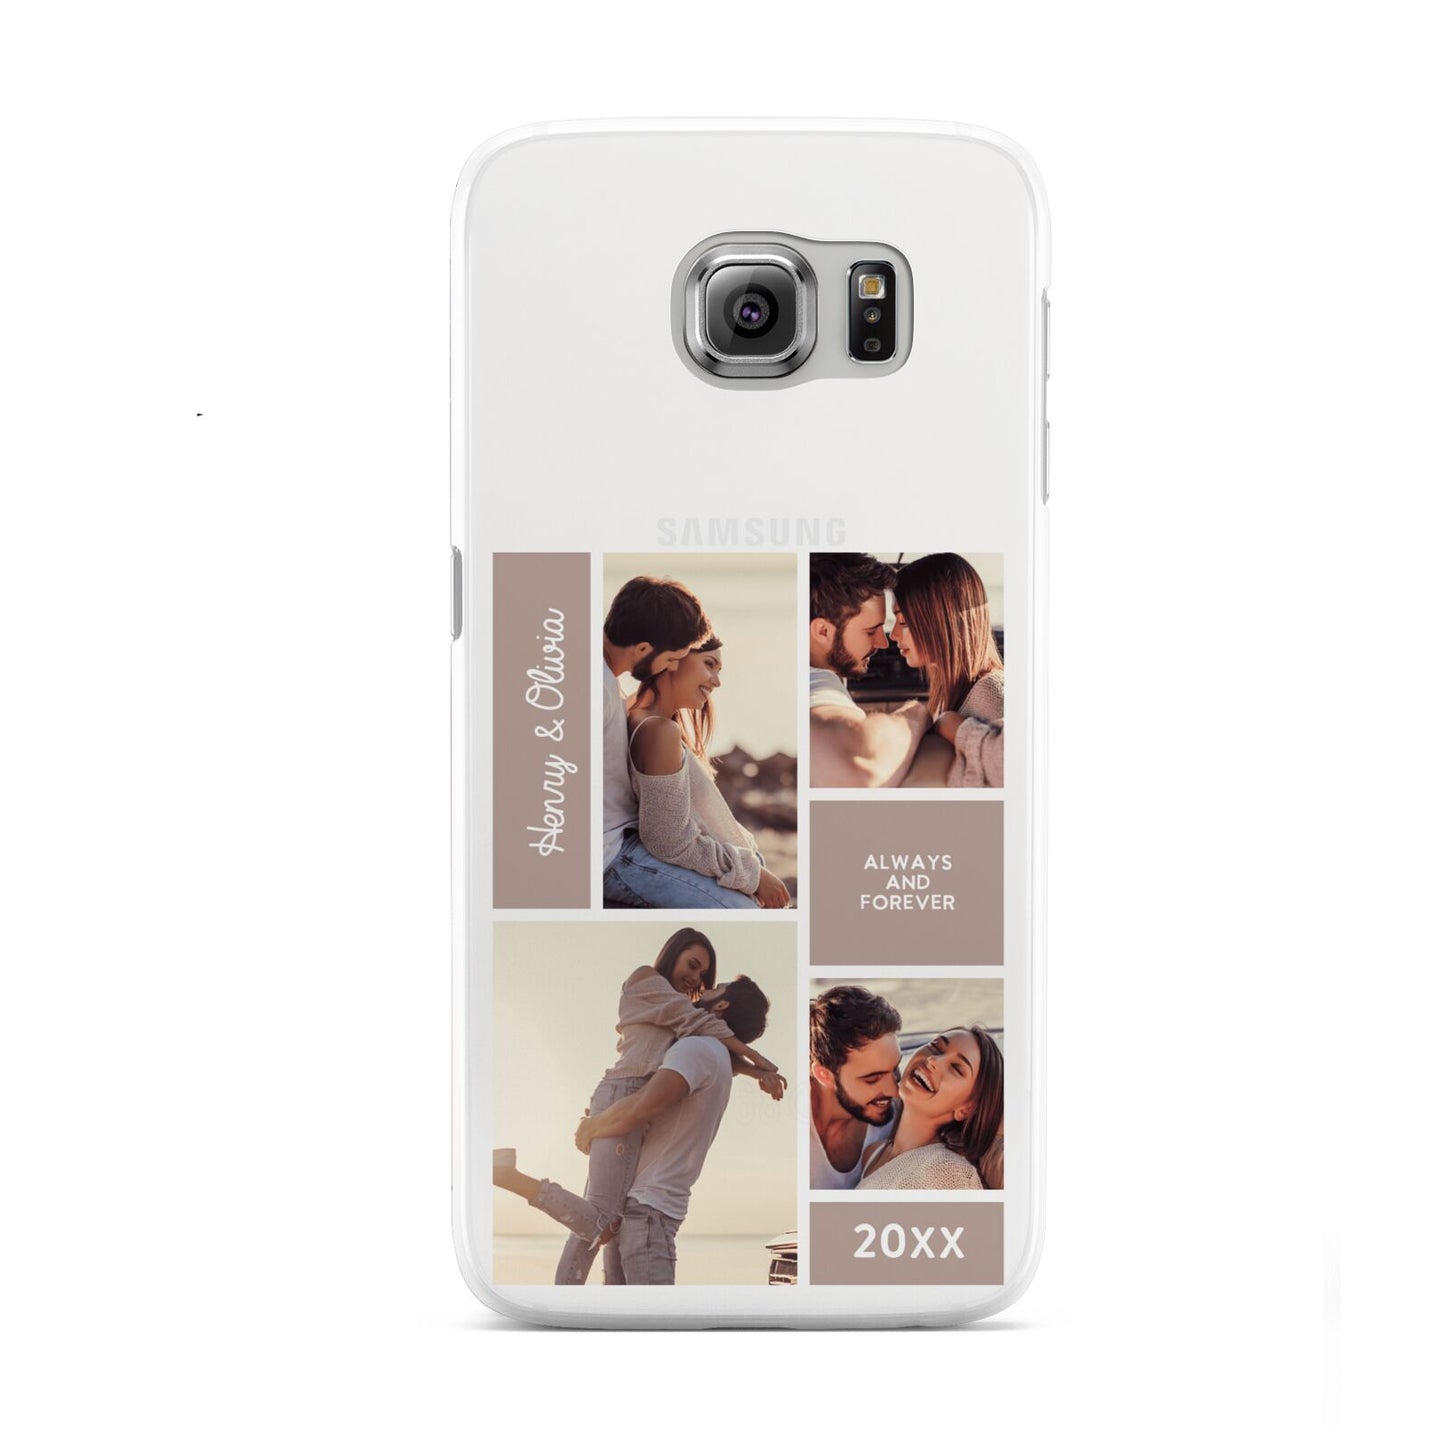 Couples Valentine Photo Collage Personalised Samsung Galaxy S6 Case